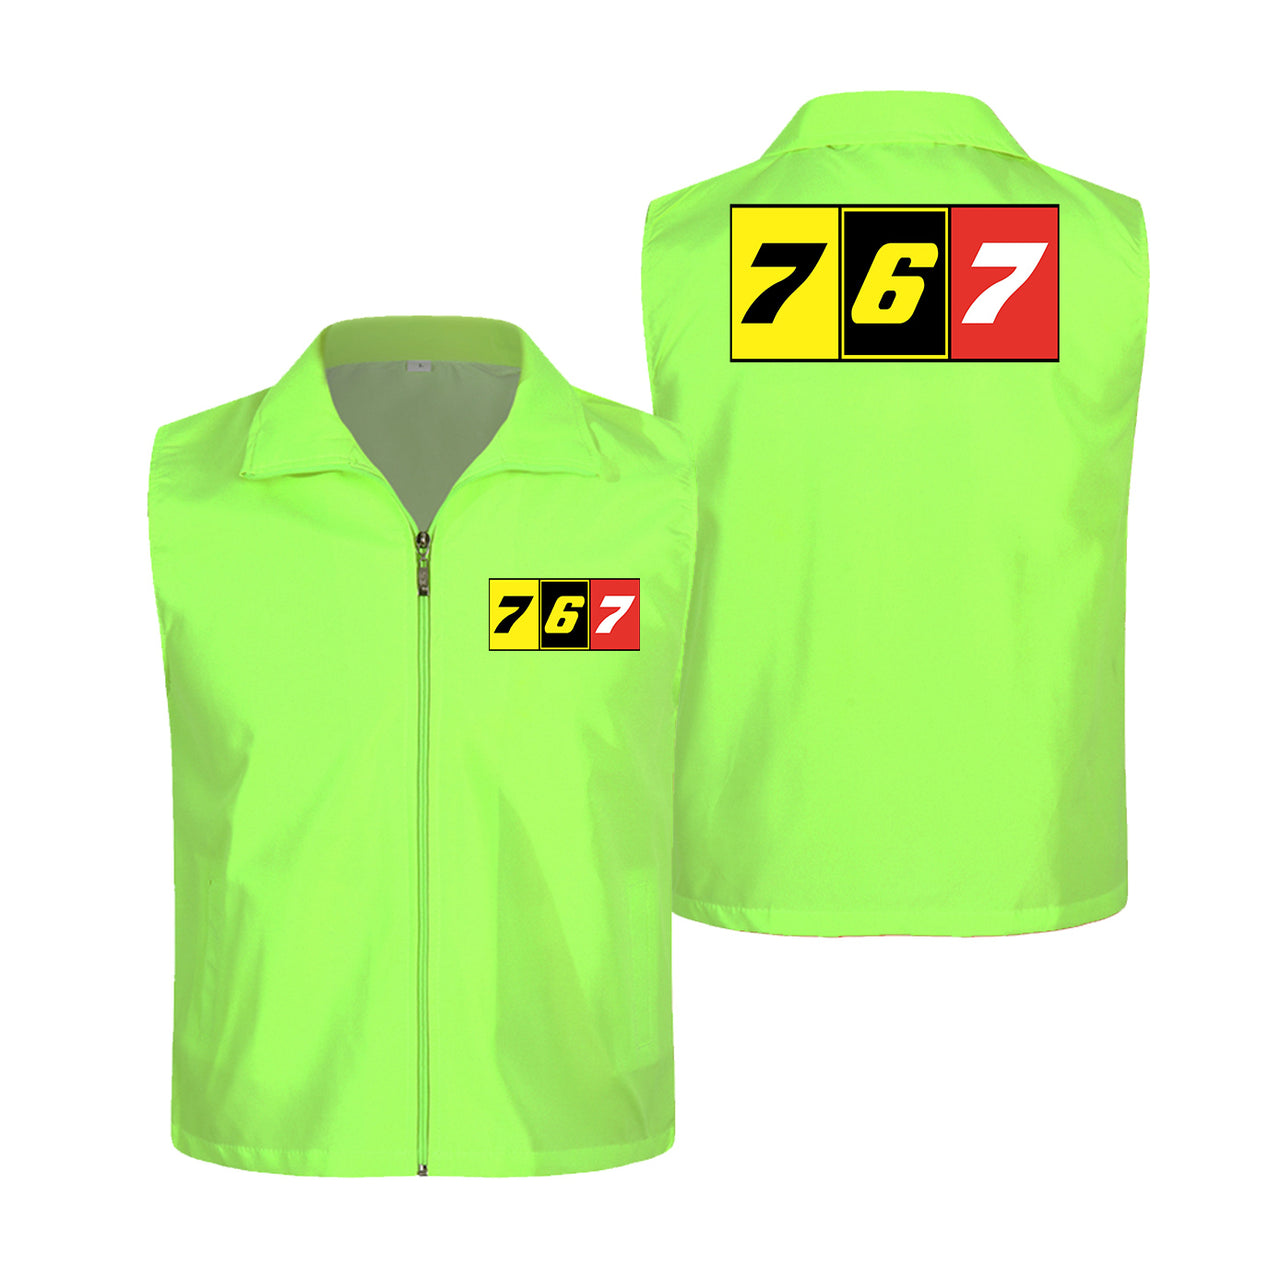 Flat Colourful 767 Designed Thin Style Vests